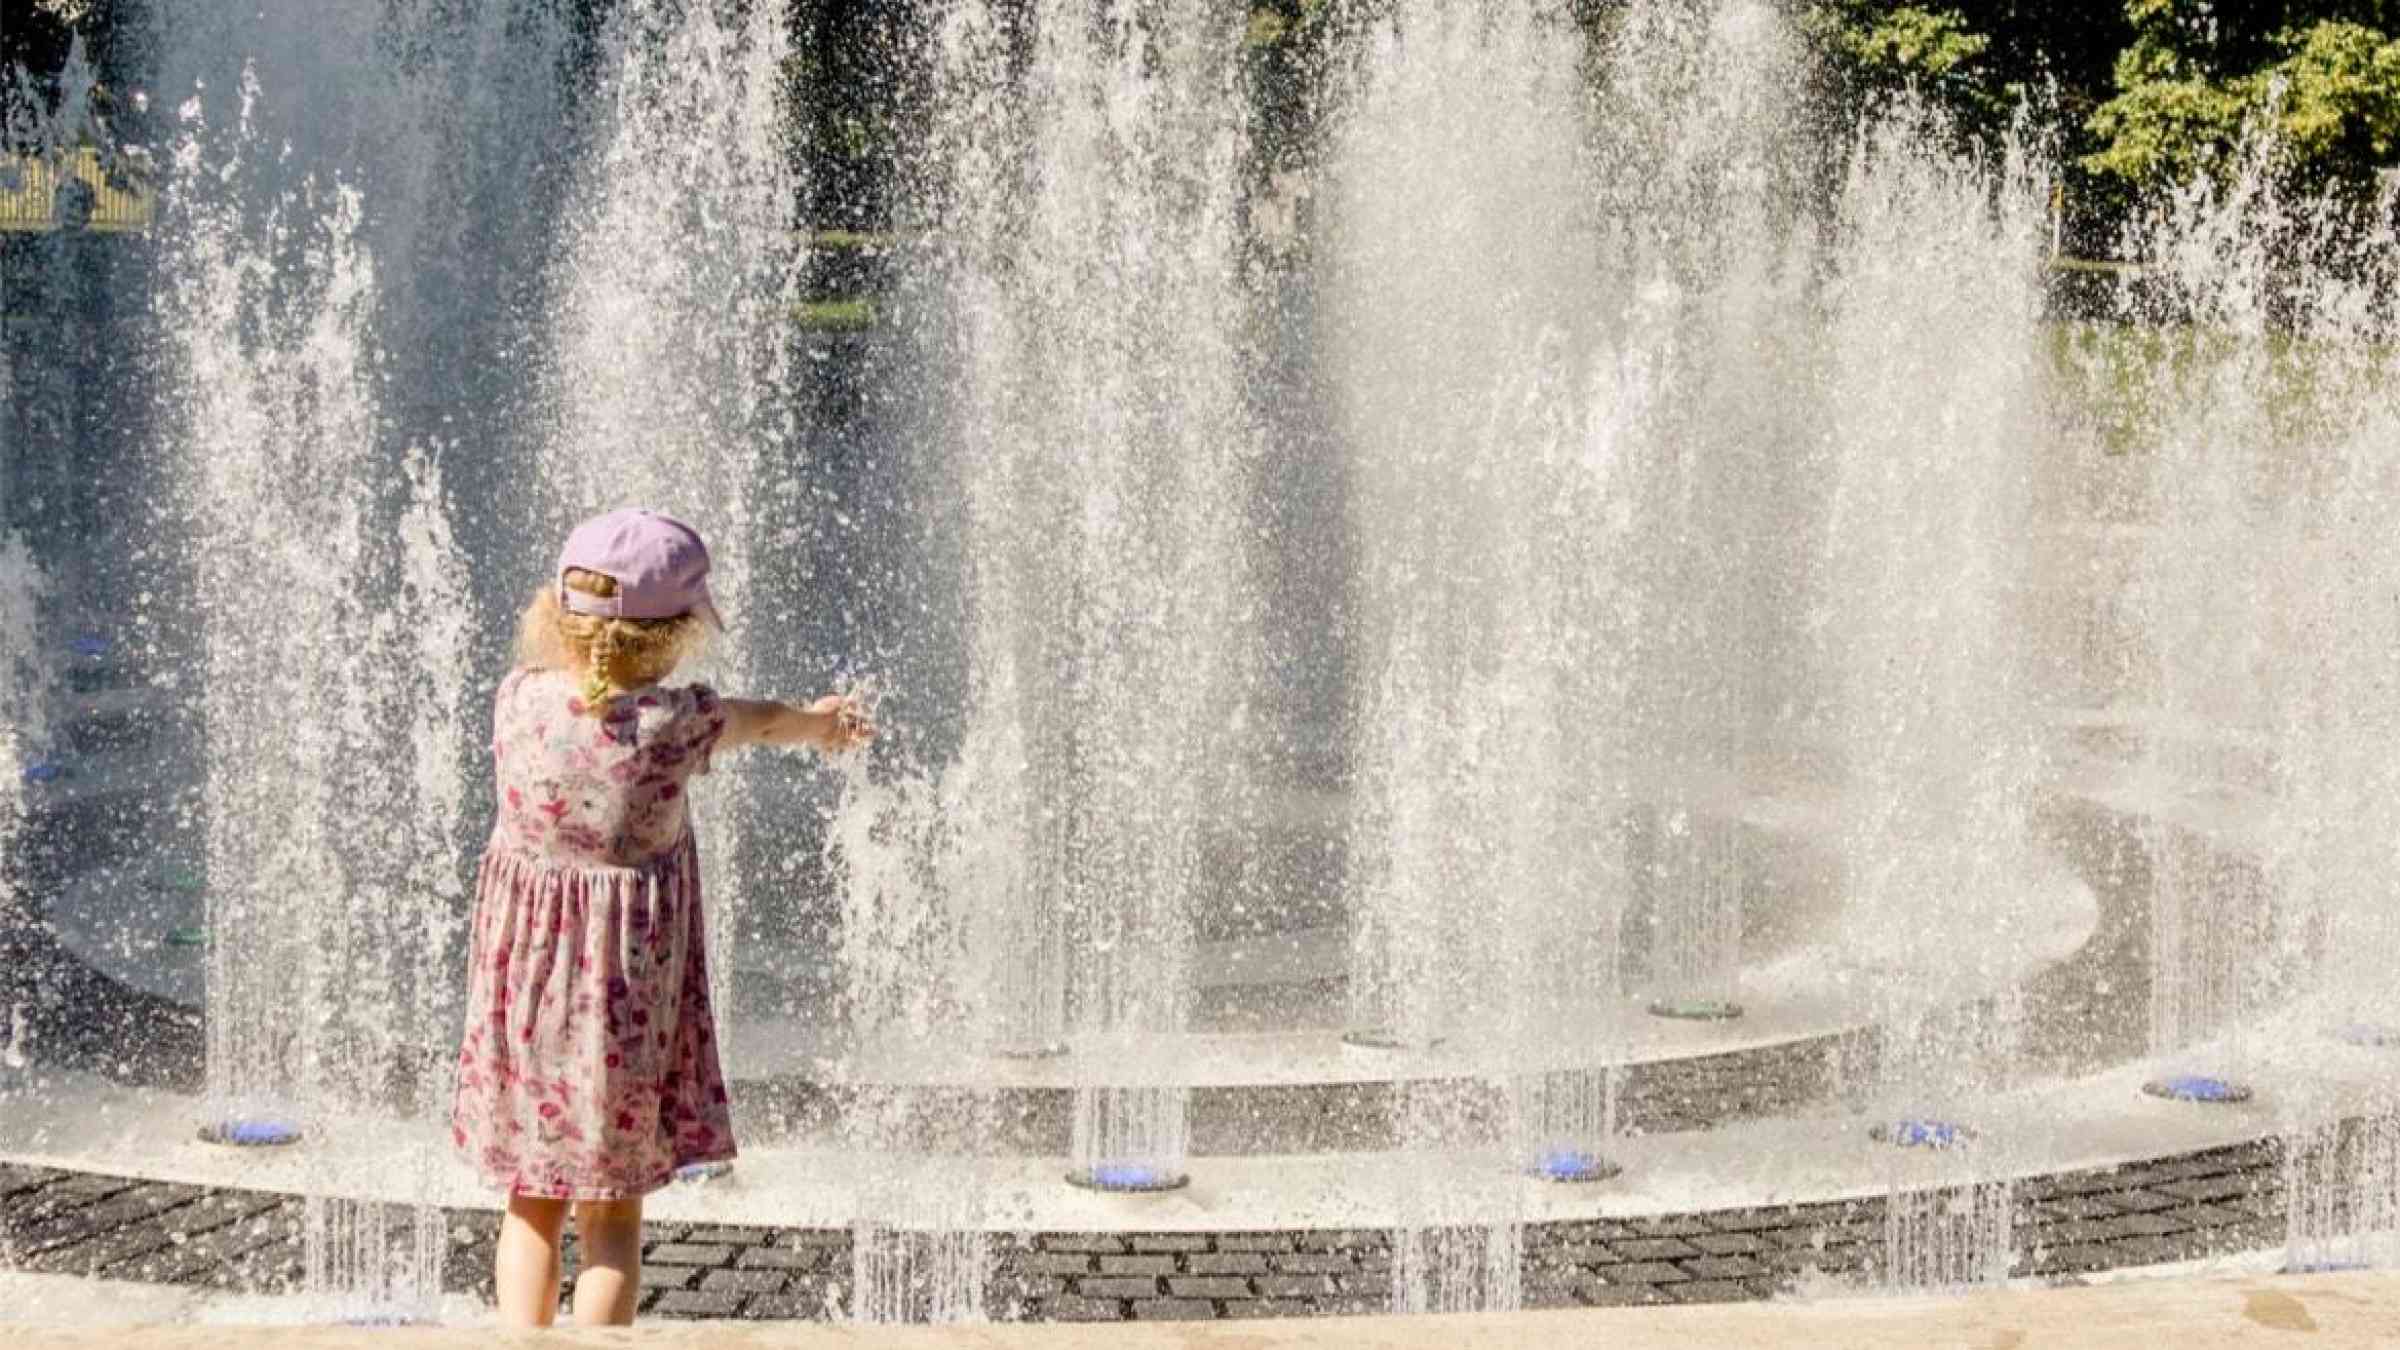 Girl playing in a fountain during a heat wave